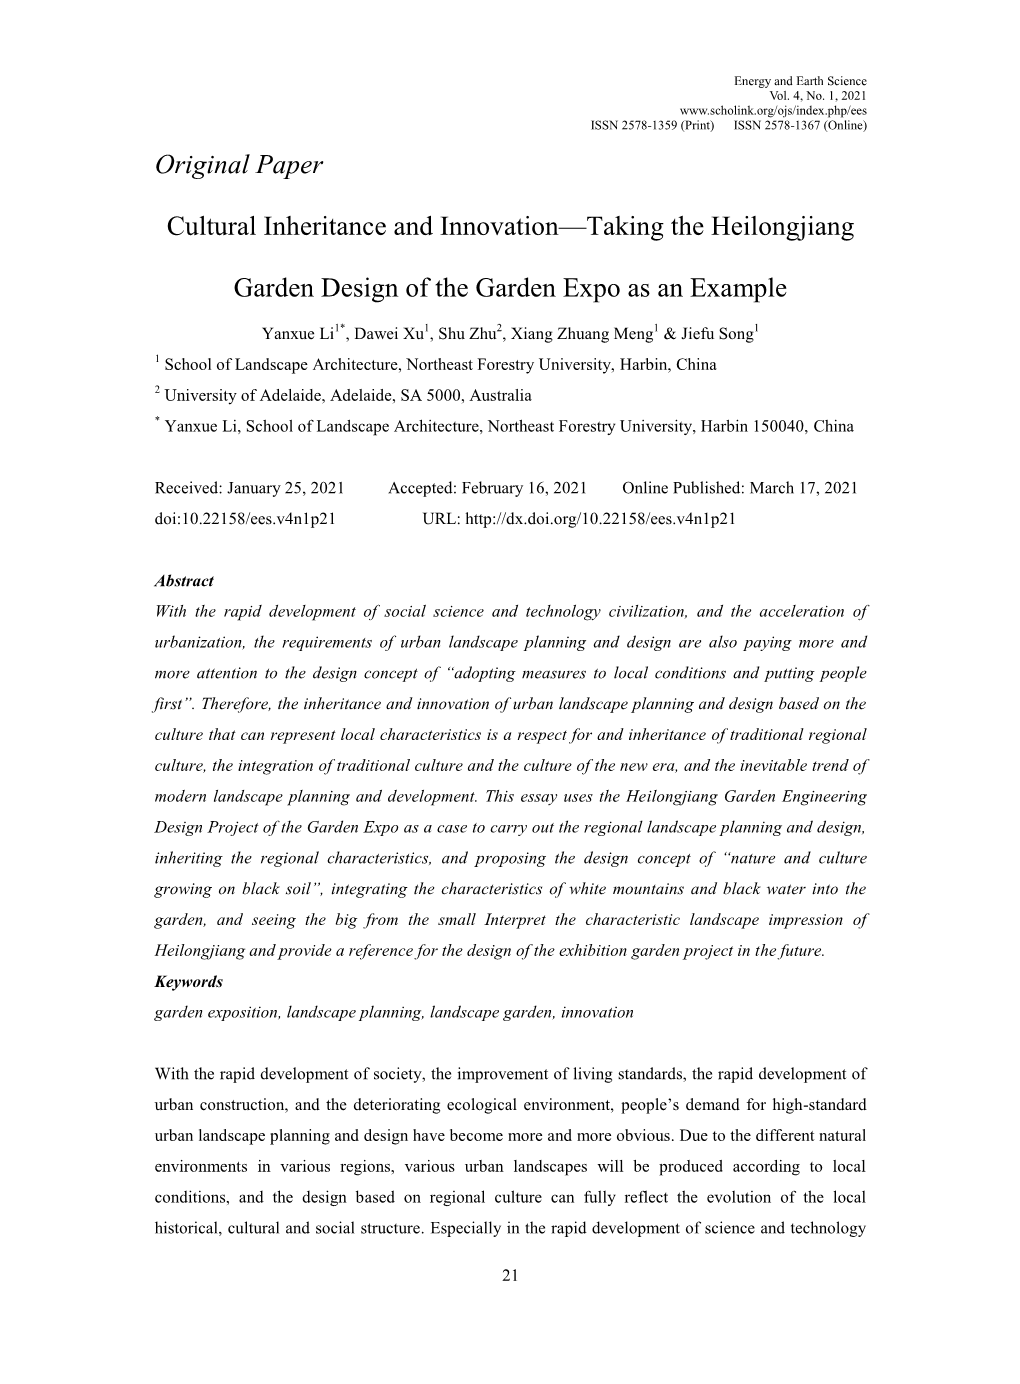 Original Paper Cultural Inheritance and Innovation—Taking The